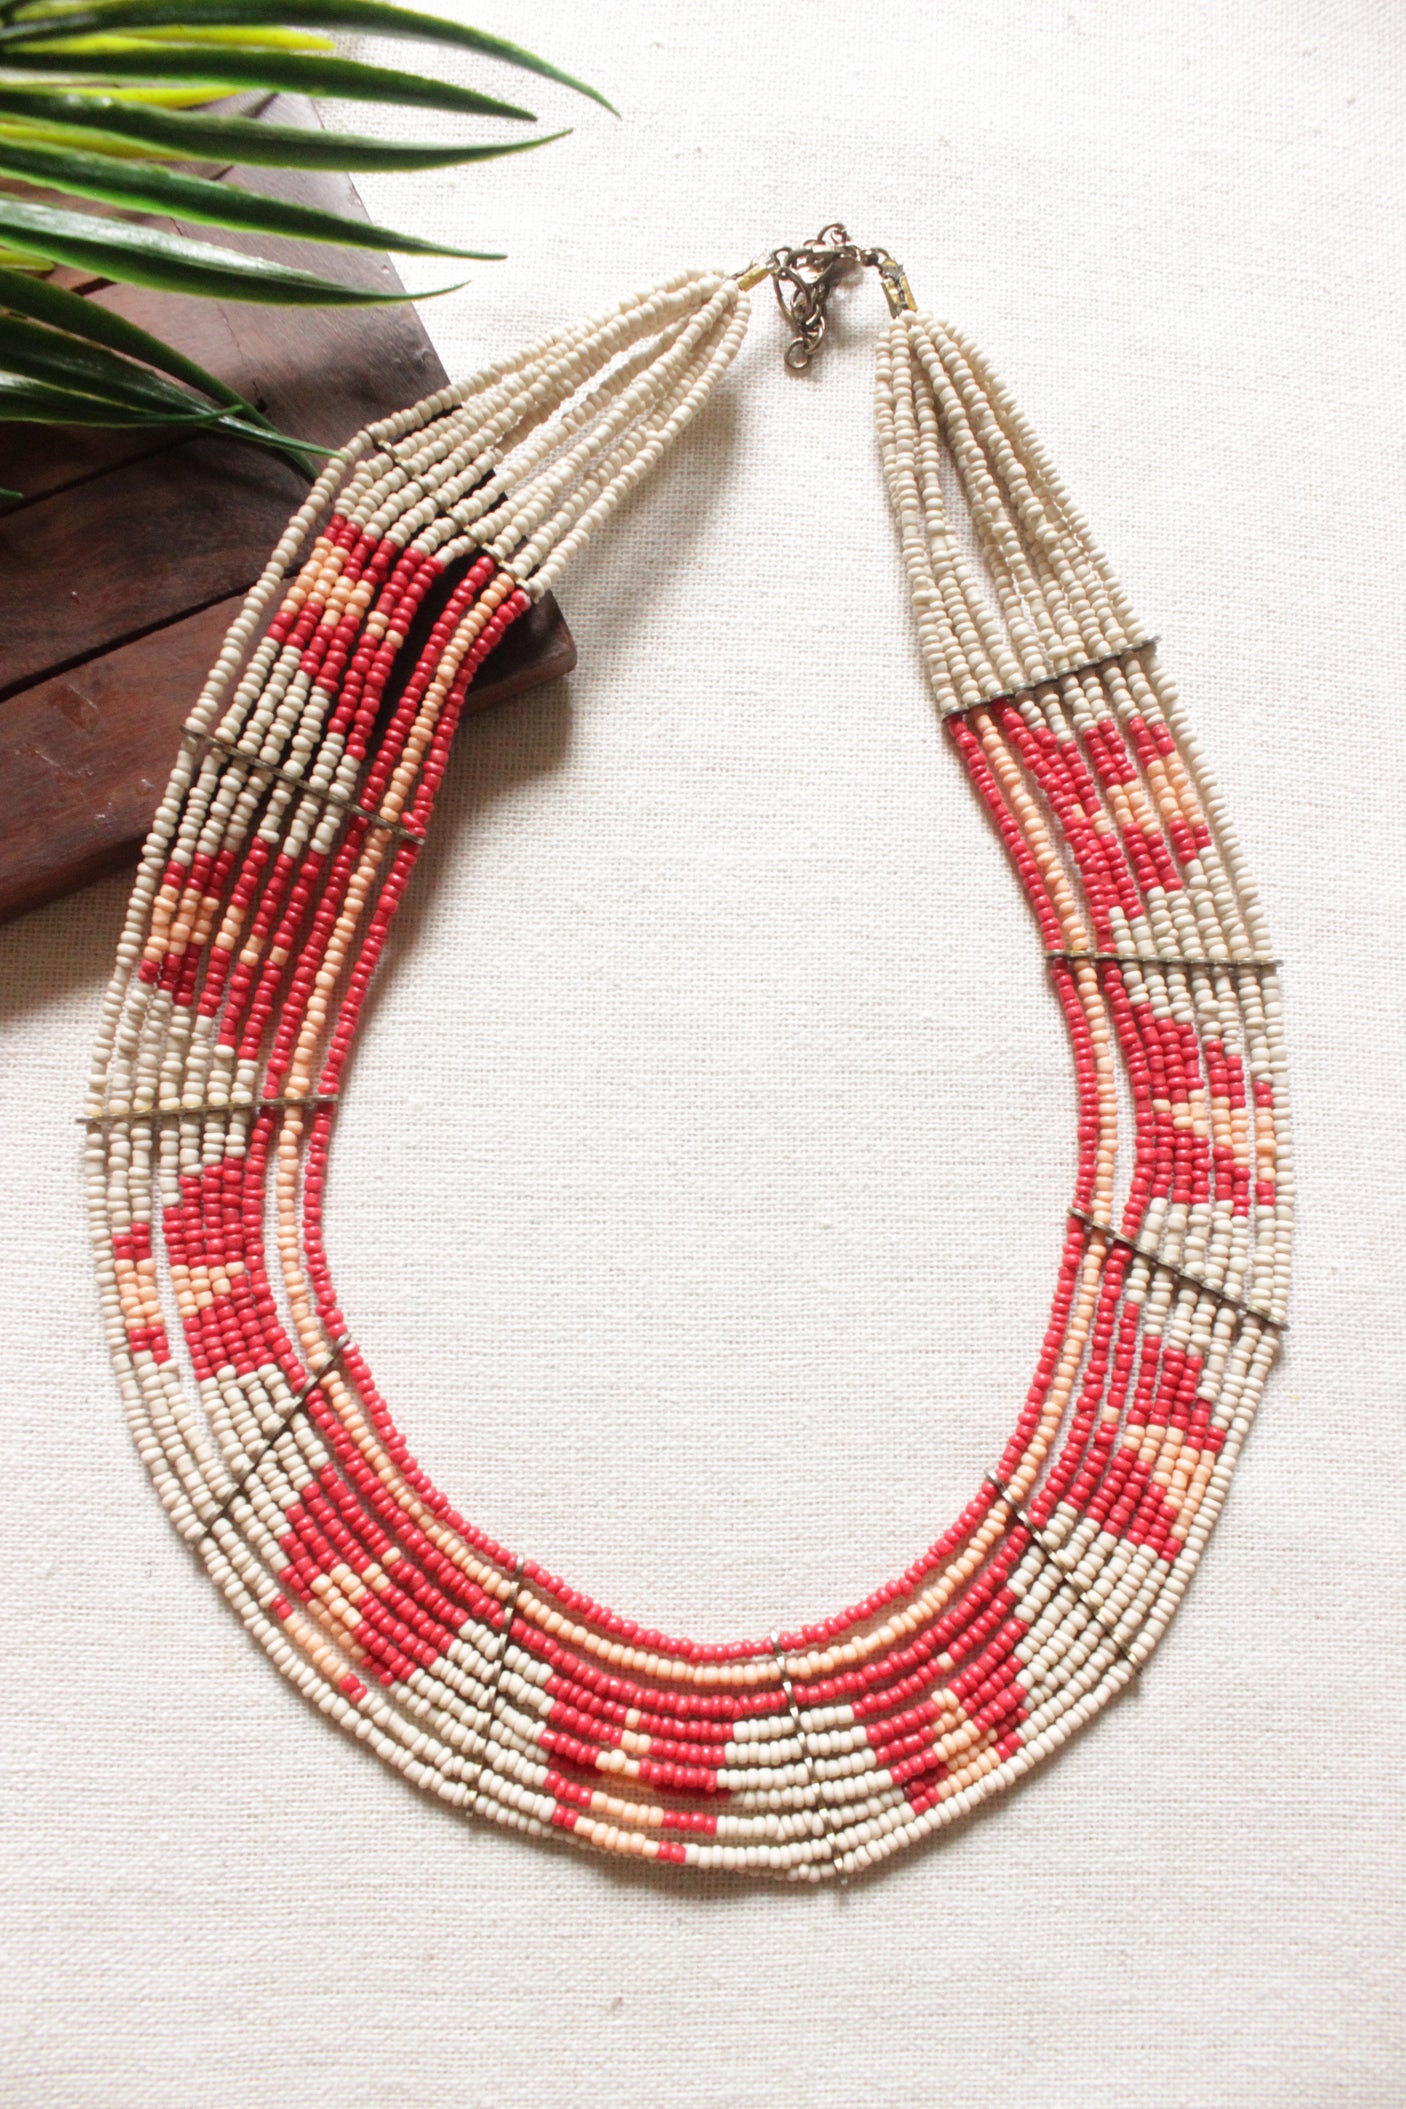 Beige and Red Beads Hand Braided Beaded Necklace